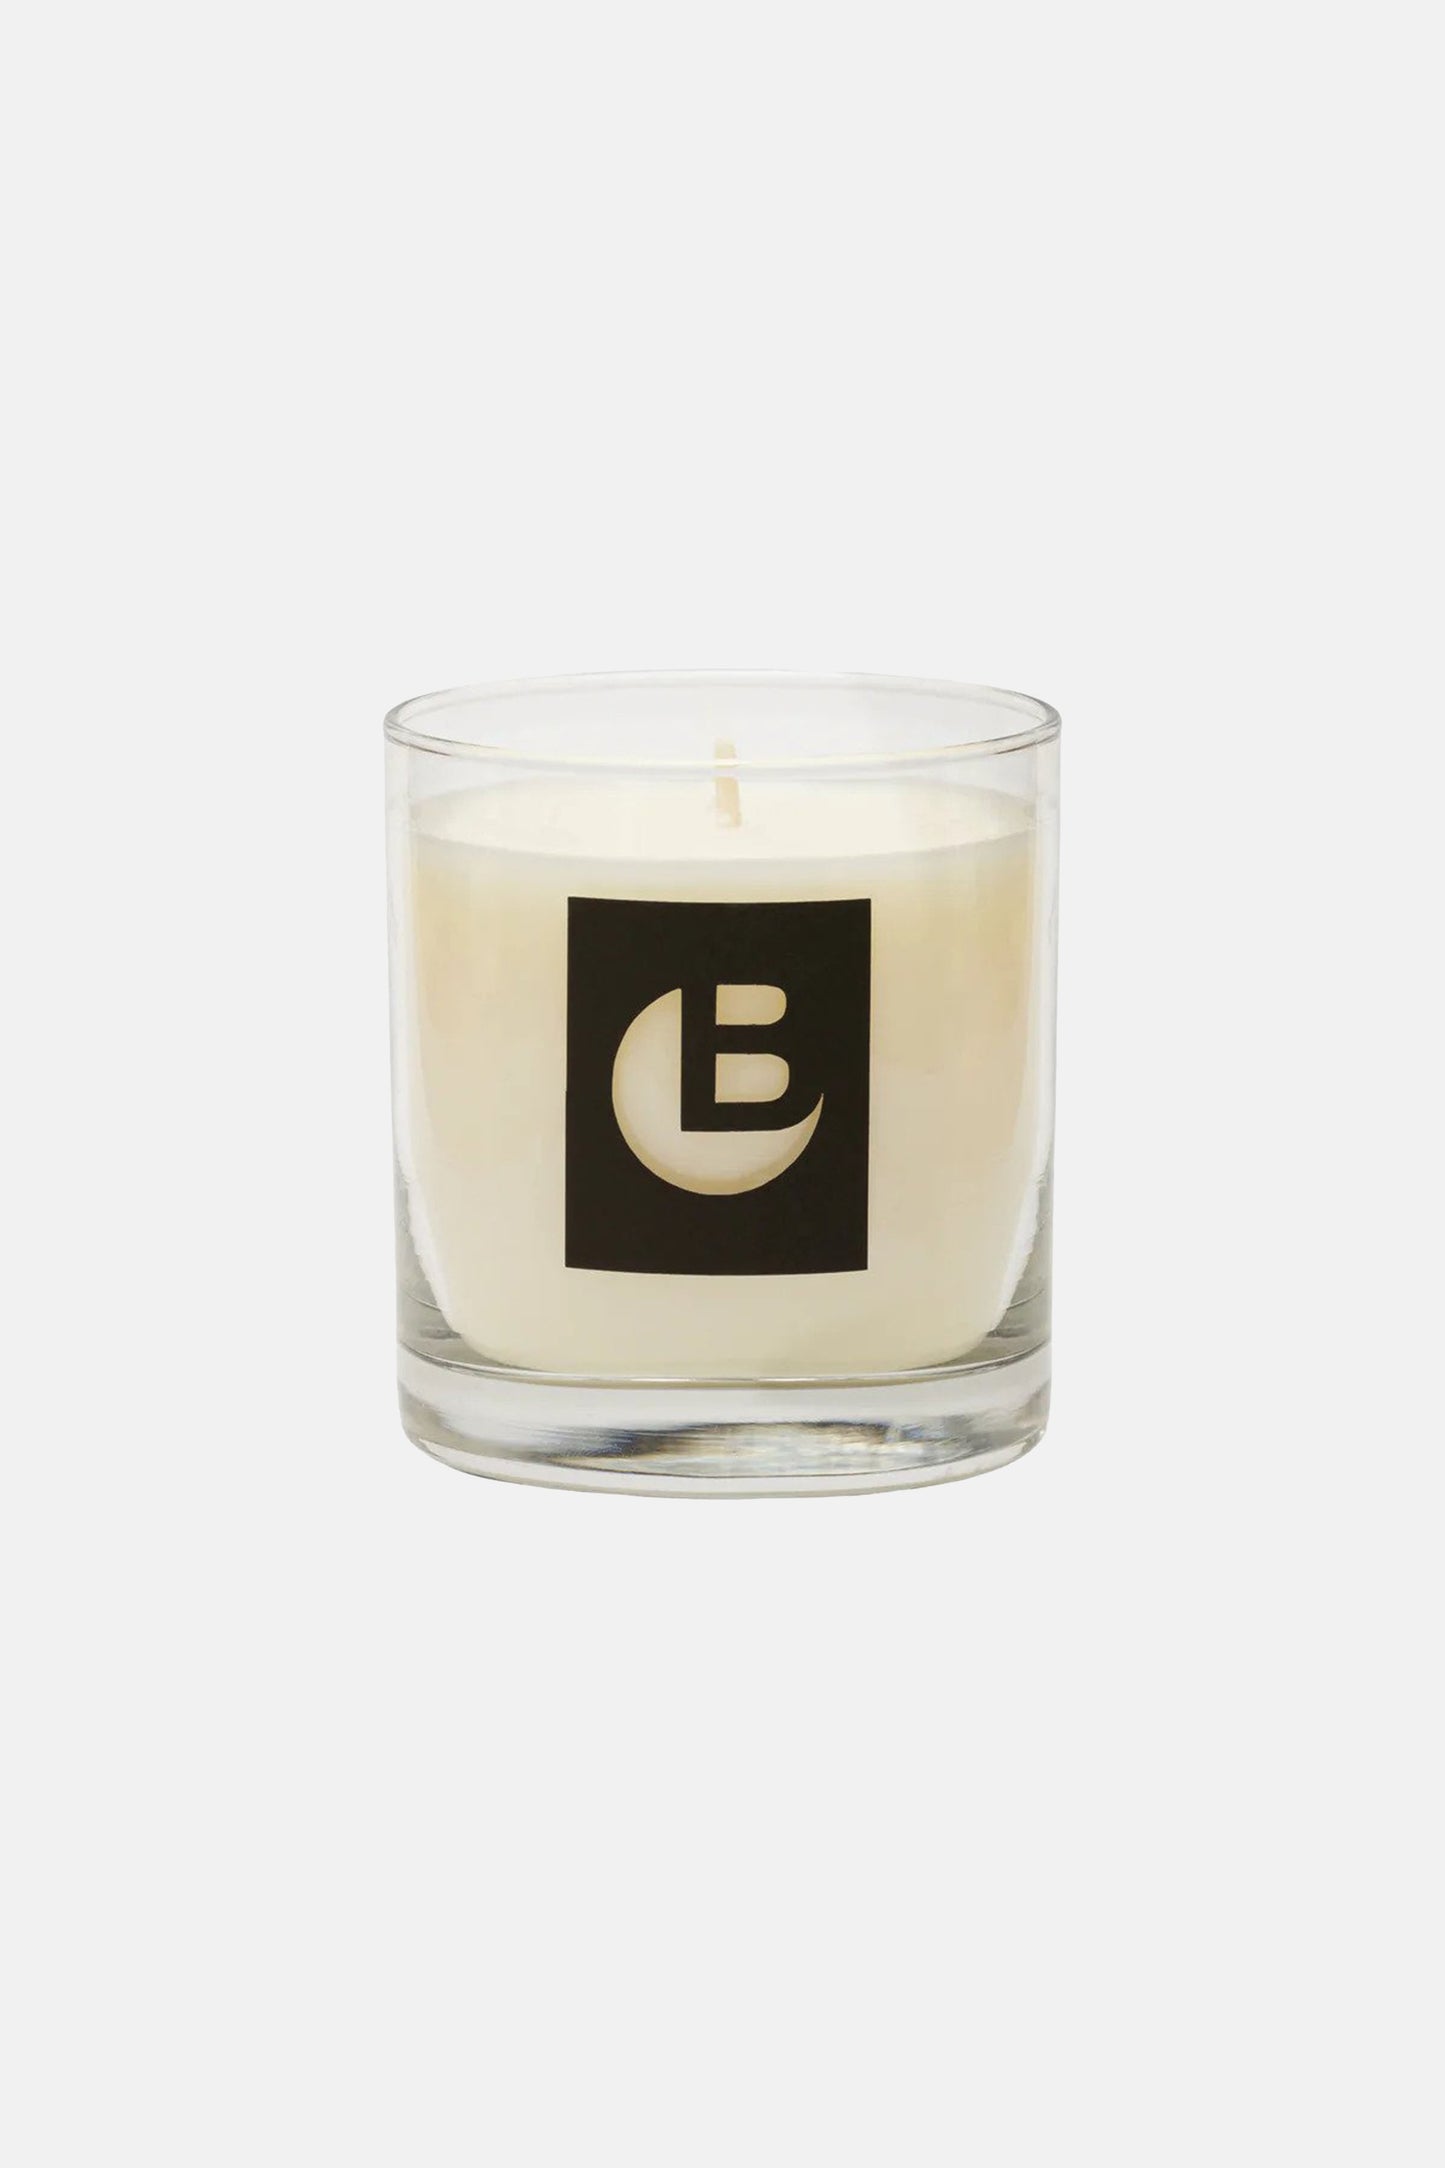 Brigade First Edition Candle